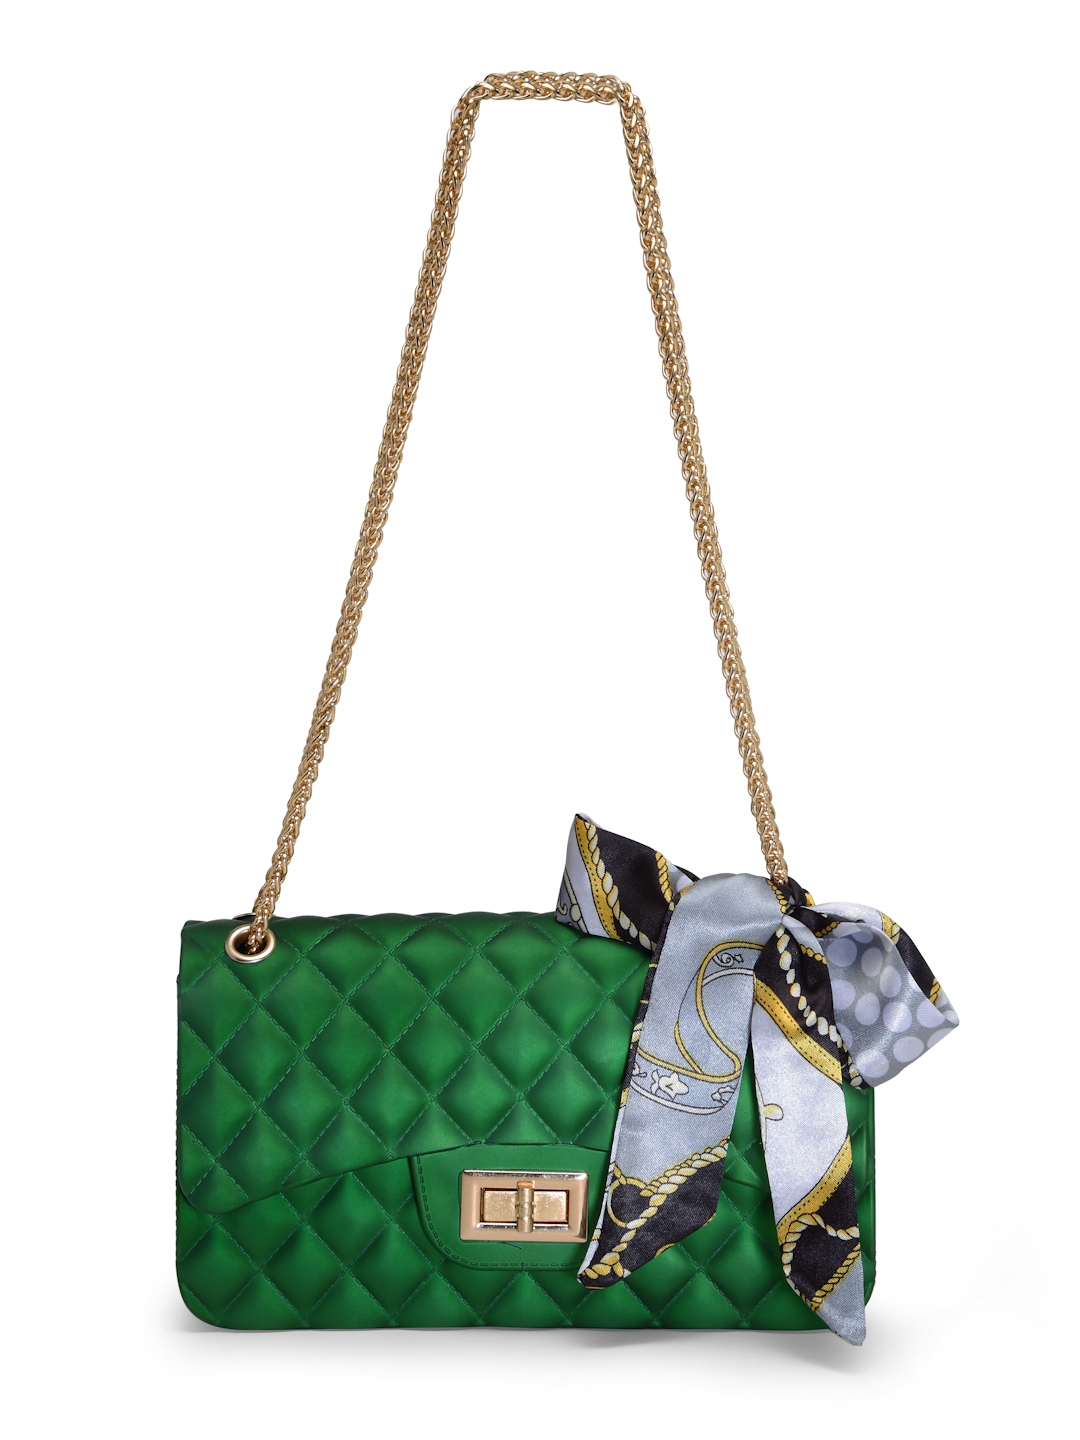 The Haul Factory | The Haul Factory Lavelle Rubber Green Checkered Patterned Shoulder Sling Bag with Designer Scarf For Women